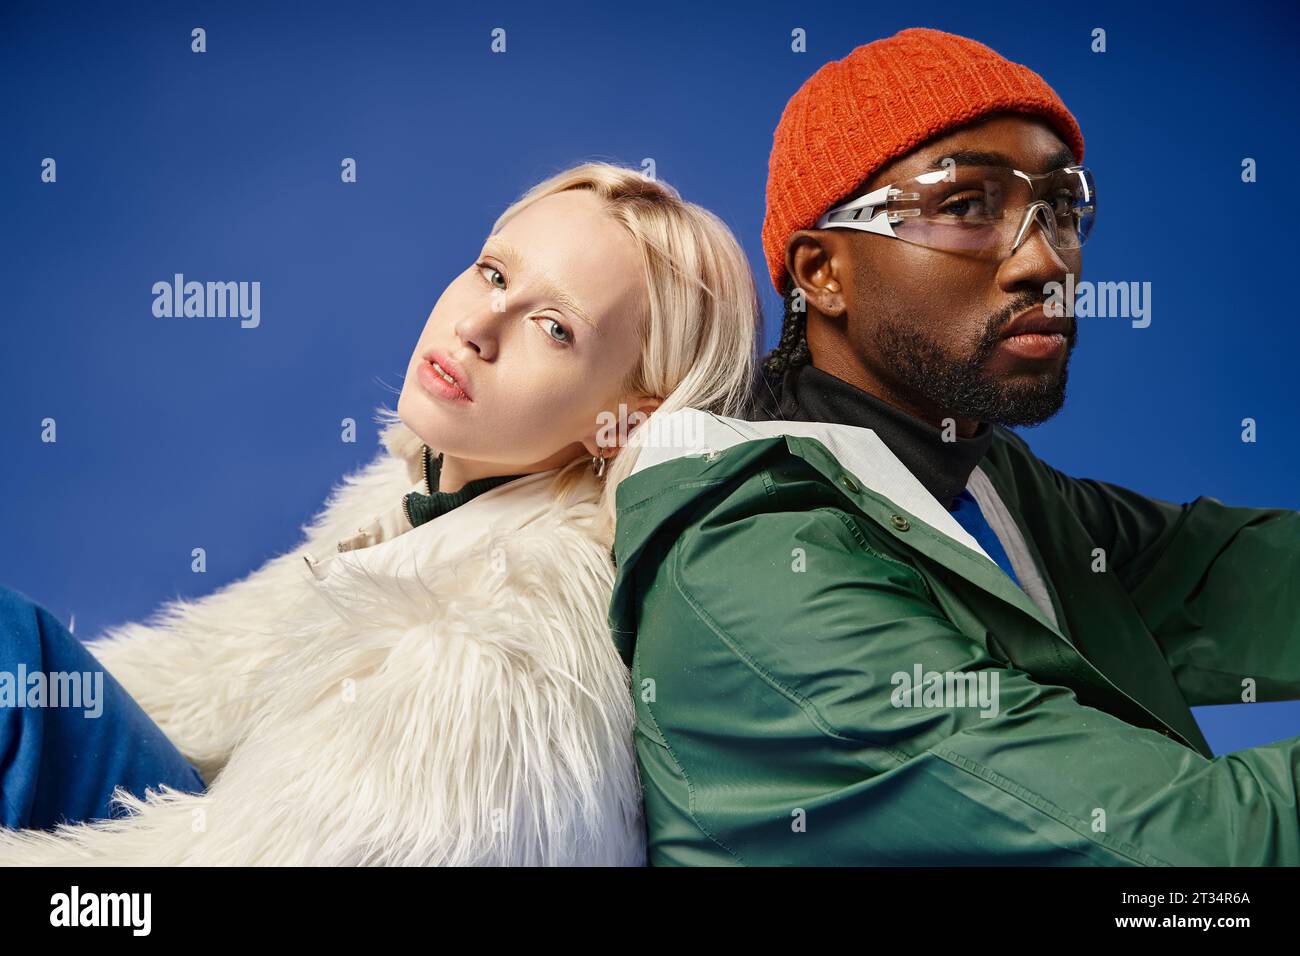 young multicultural models in winter attire sitting together on blue backdrop, diversity and fashion Stock Photo